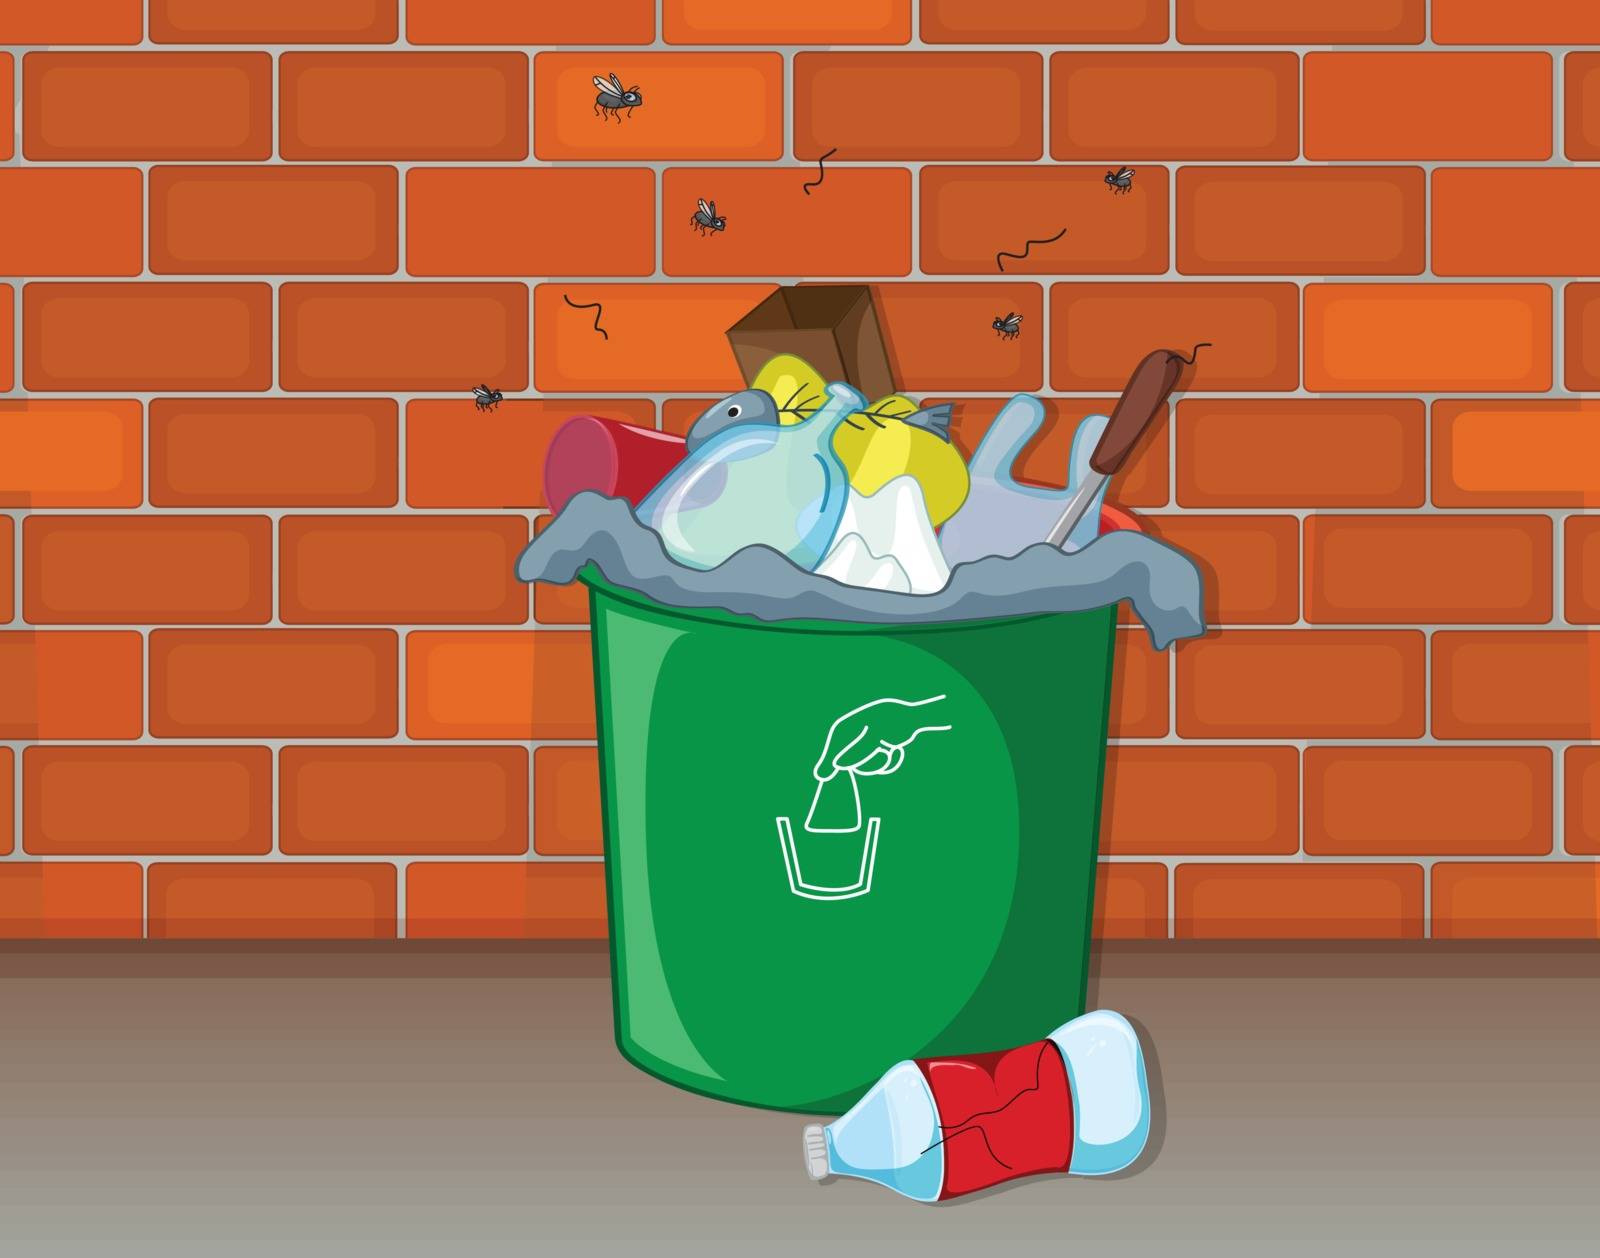 Illustration of a dustbin in front of a wall